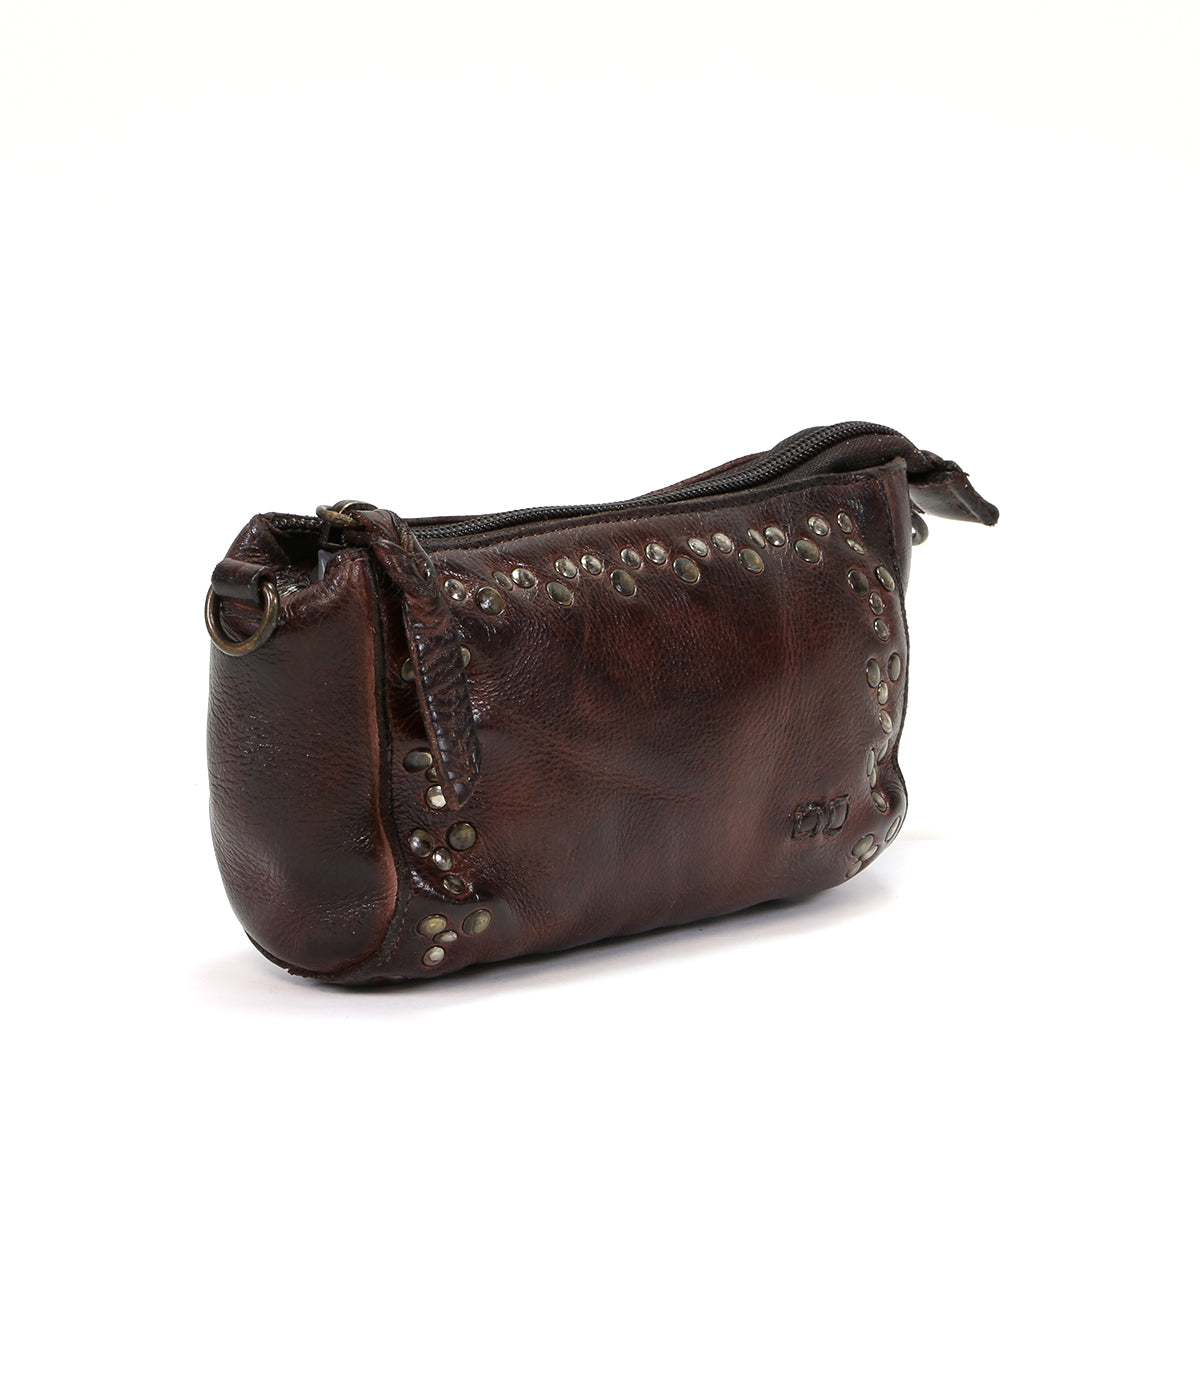 A compact Encase brown leather purse embellished with metal studs from Bed Stu.